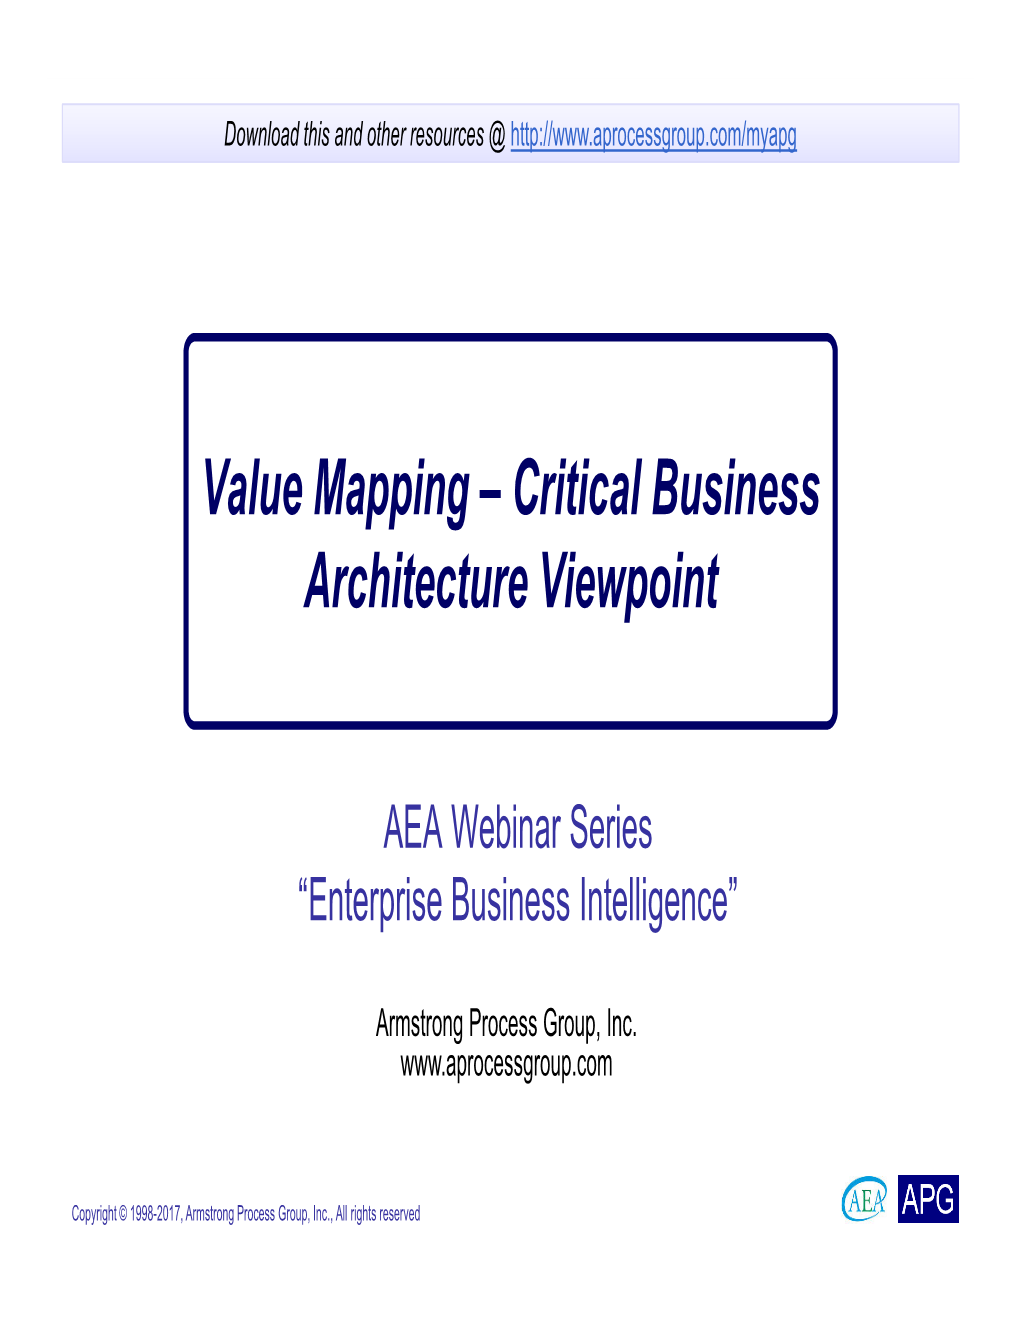 Value Mapping – Critical Business Architecture Viewpoint